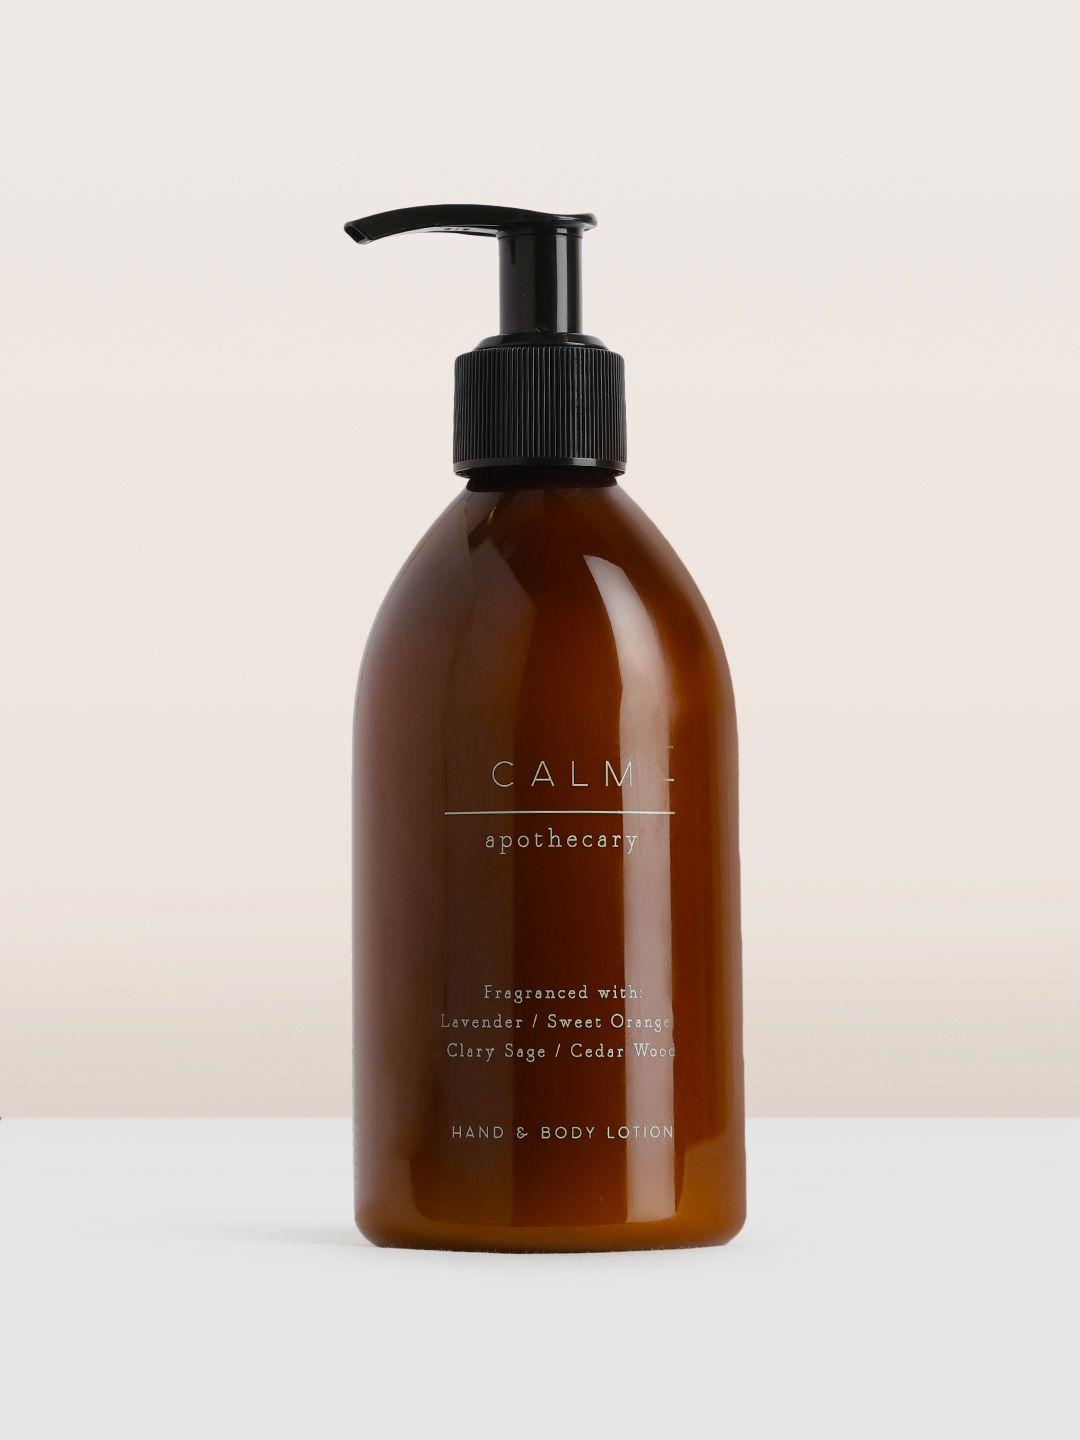 marks-&-spencer-apothecary-calm-hand-&-body-lotion-250ml